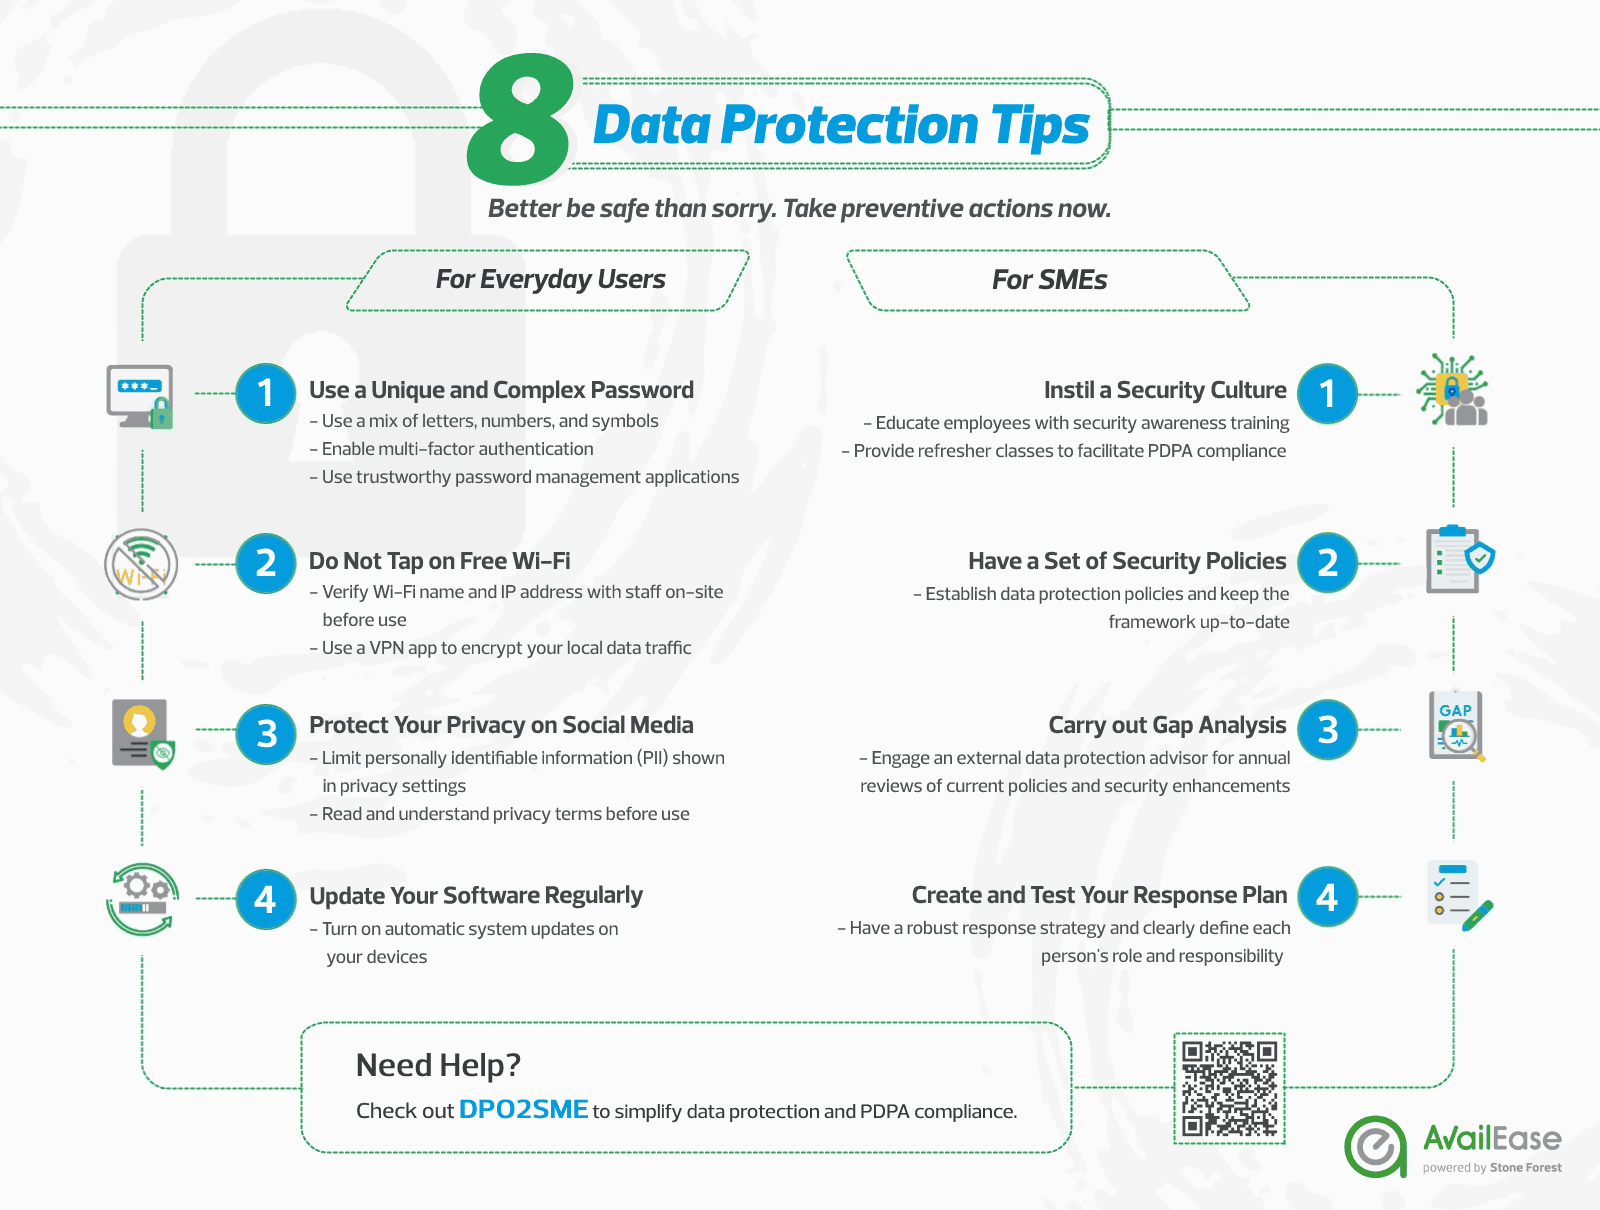 DPO2SME_8 Data Protection Tips for SMEs and Everyday users 